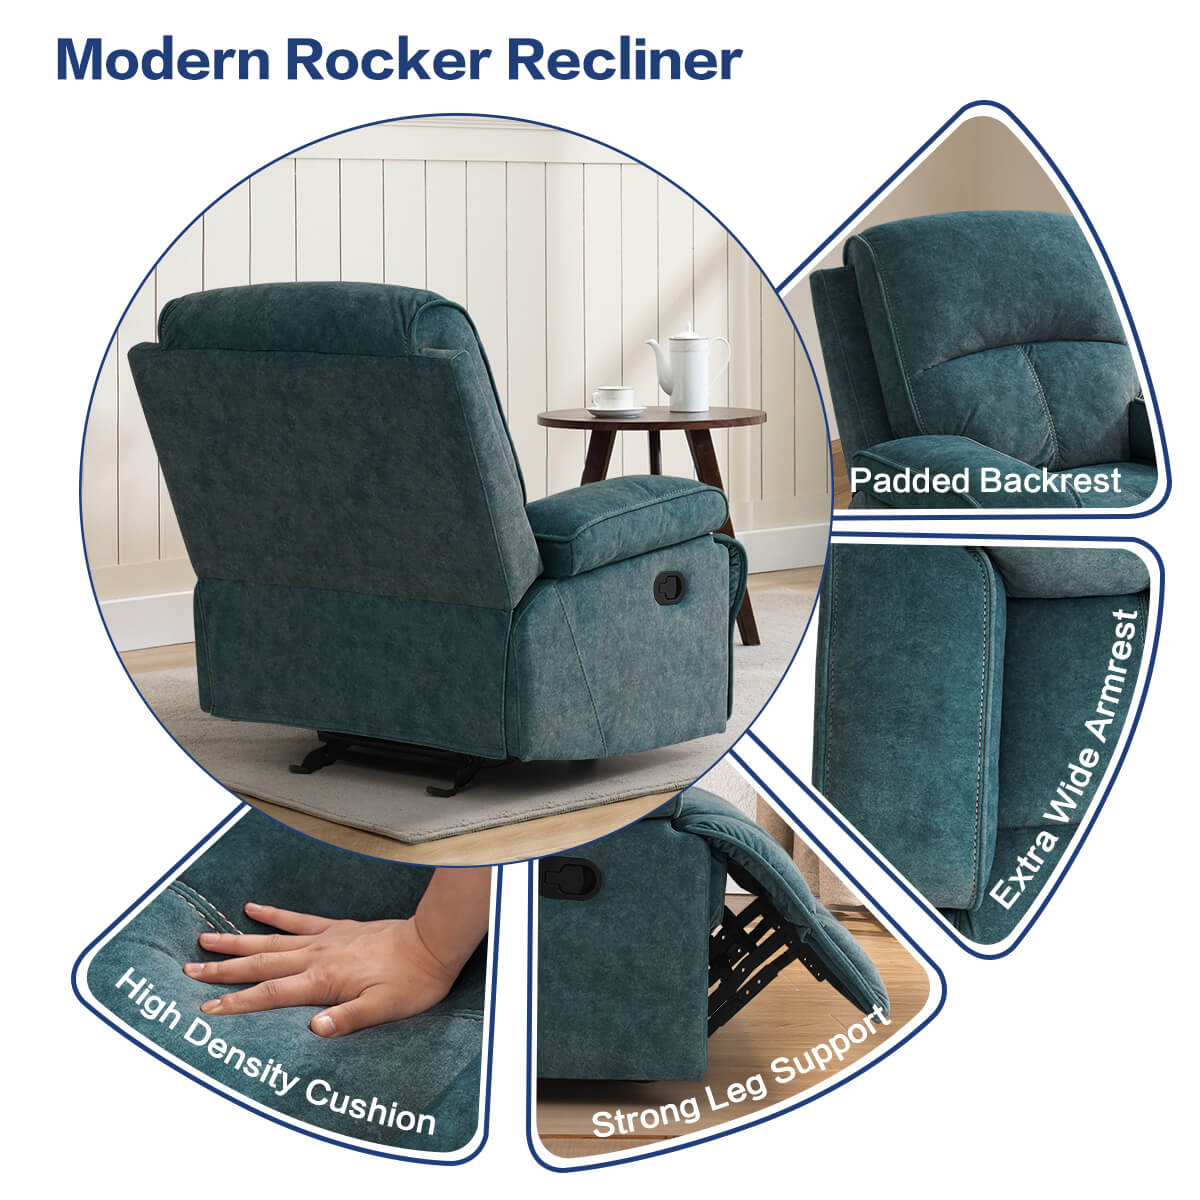 Manual Rocking Recliner Nursery Gliders, Breathable Fabric Blue